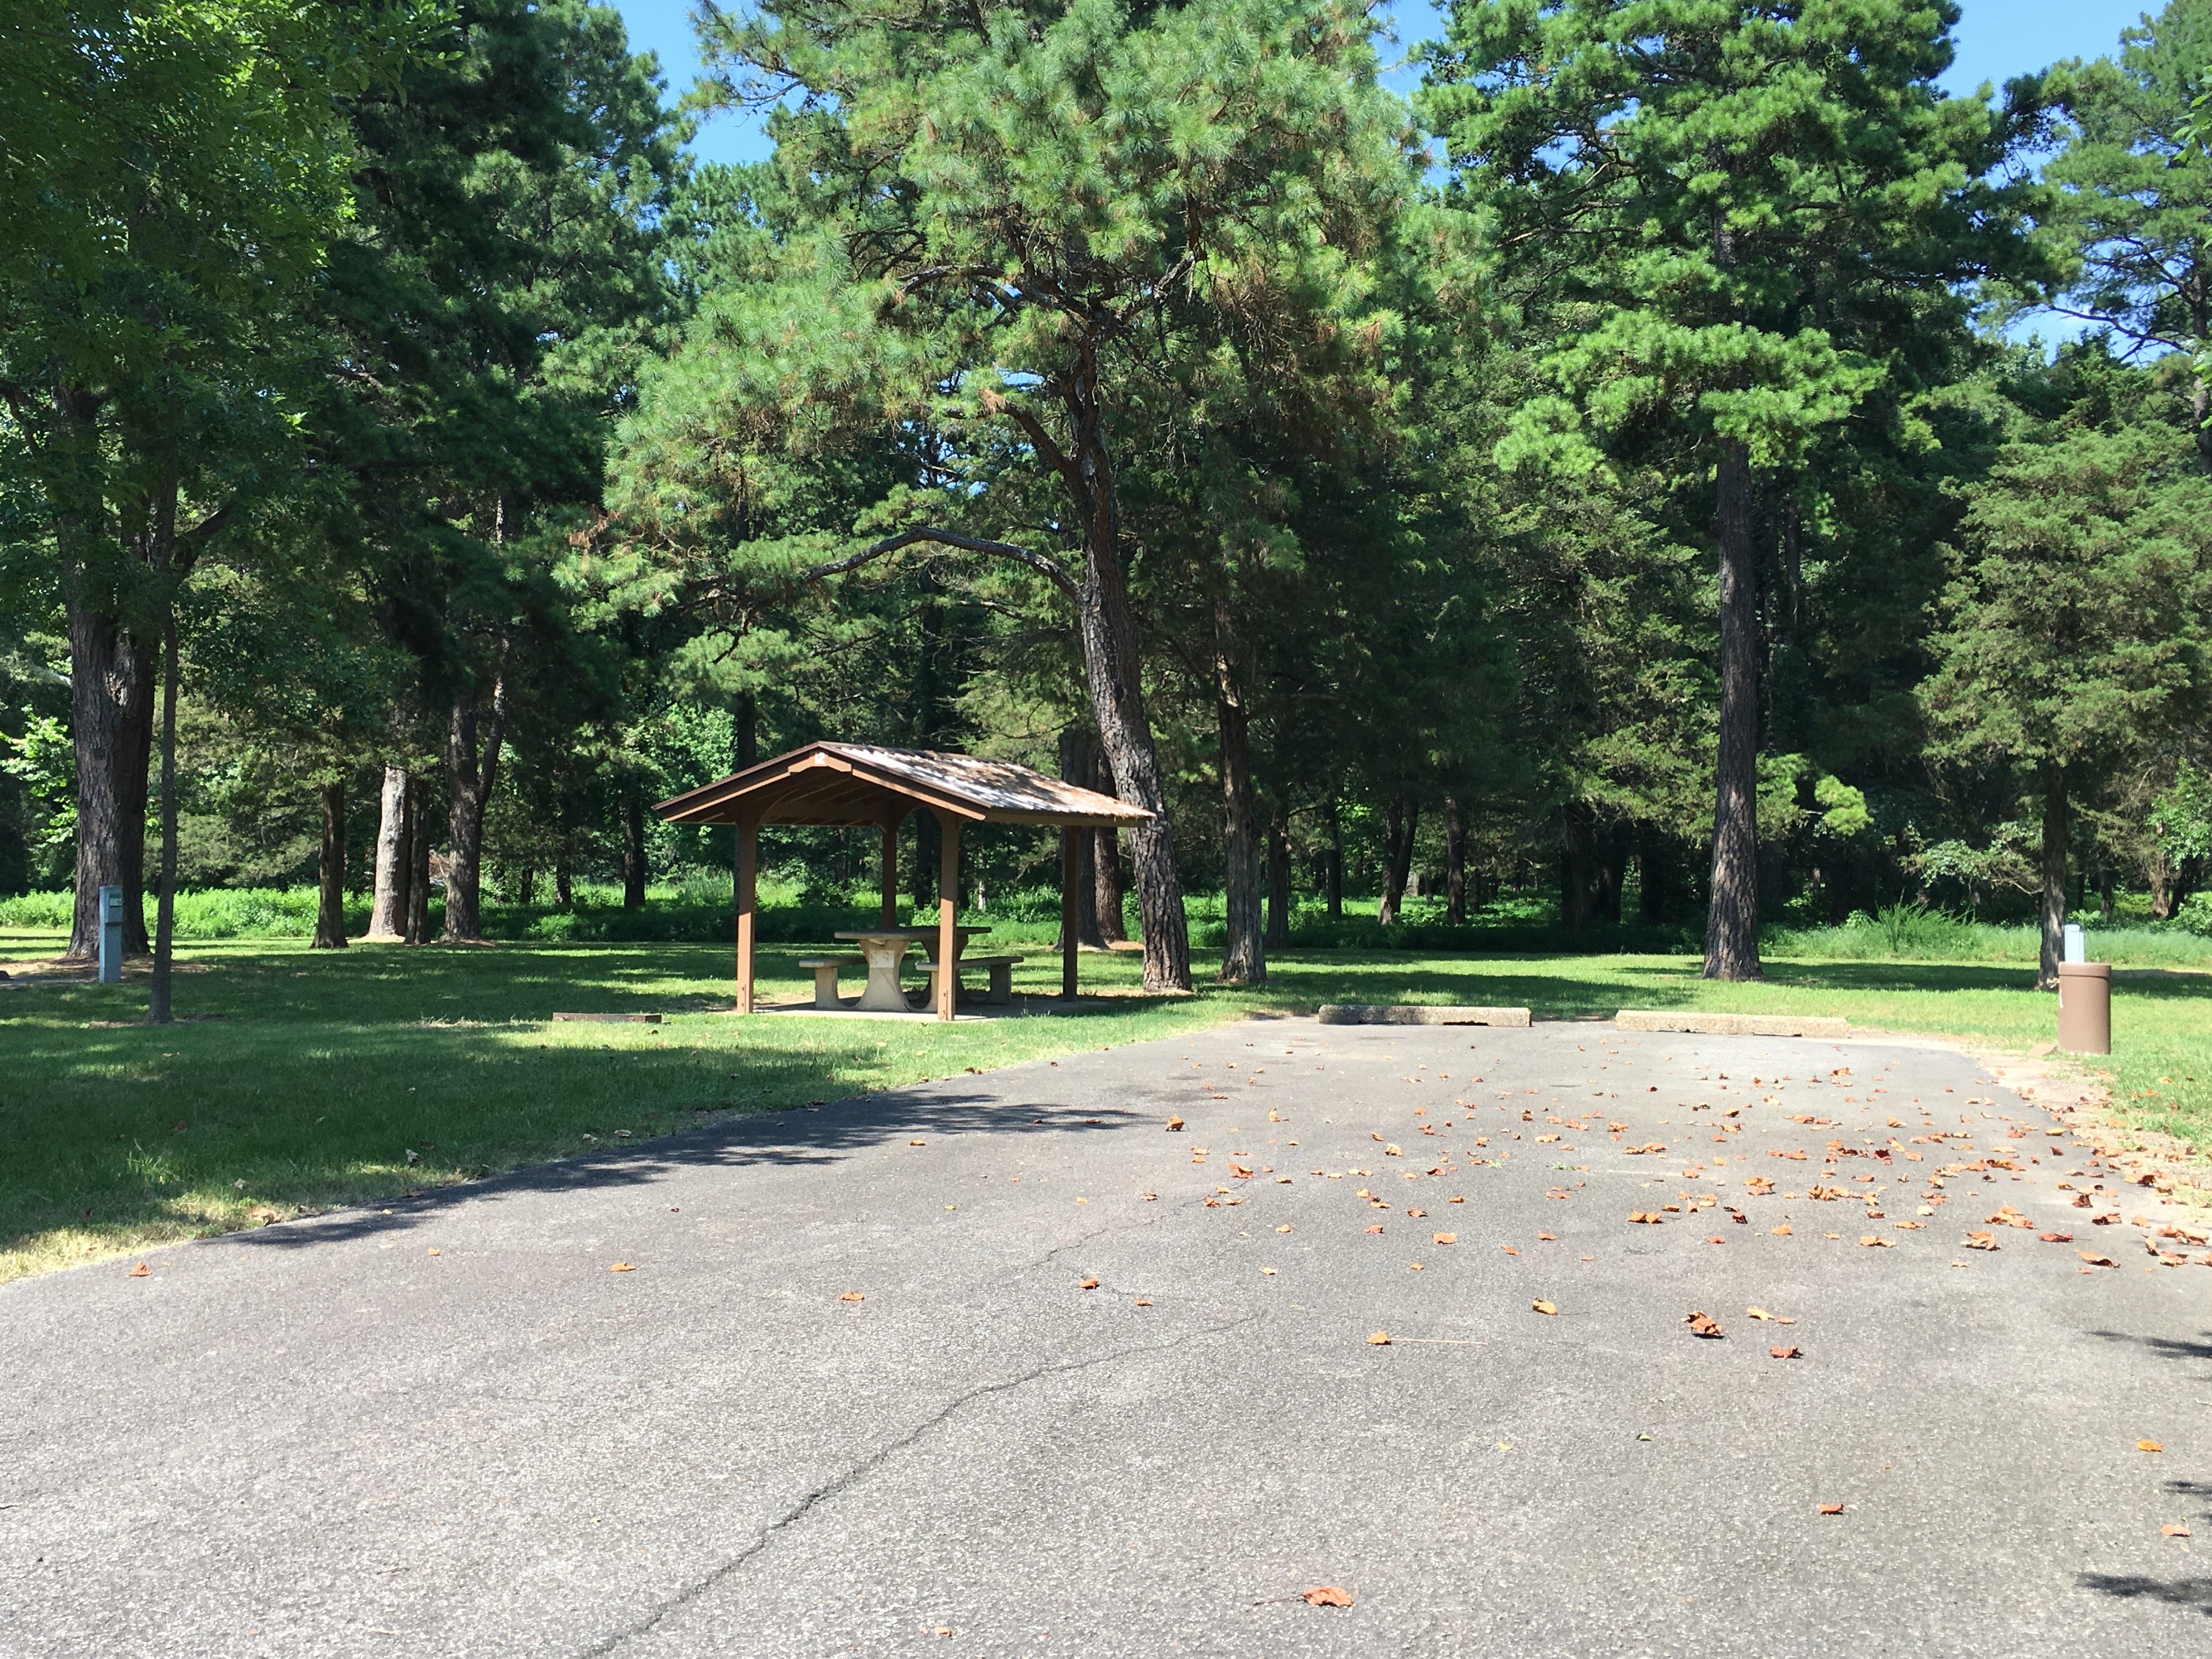 Camper submitted image from COE Dardanelle Lake Old Post Road Campground - 2